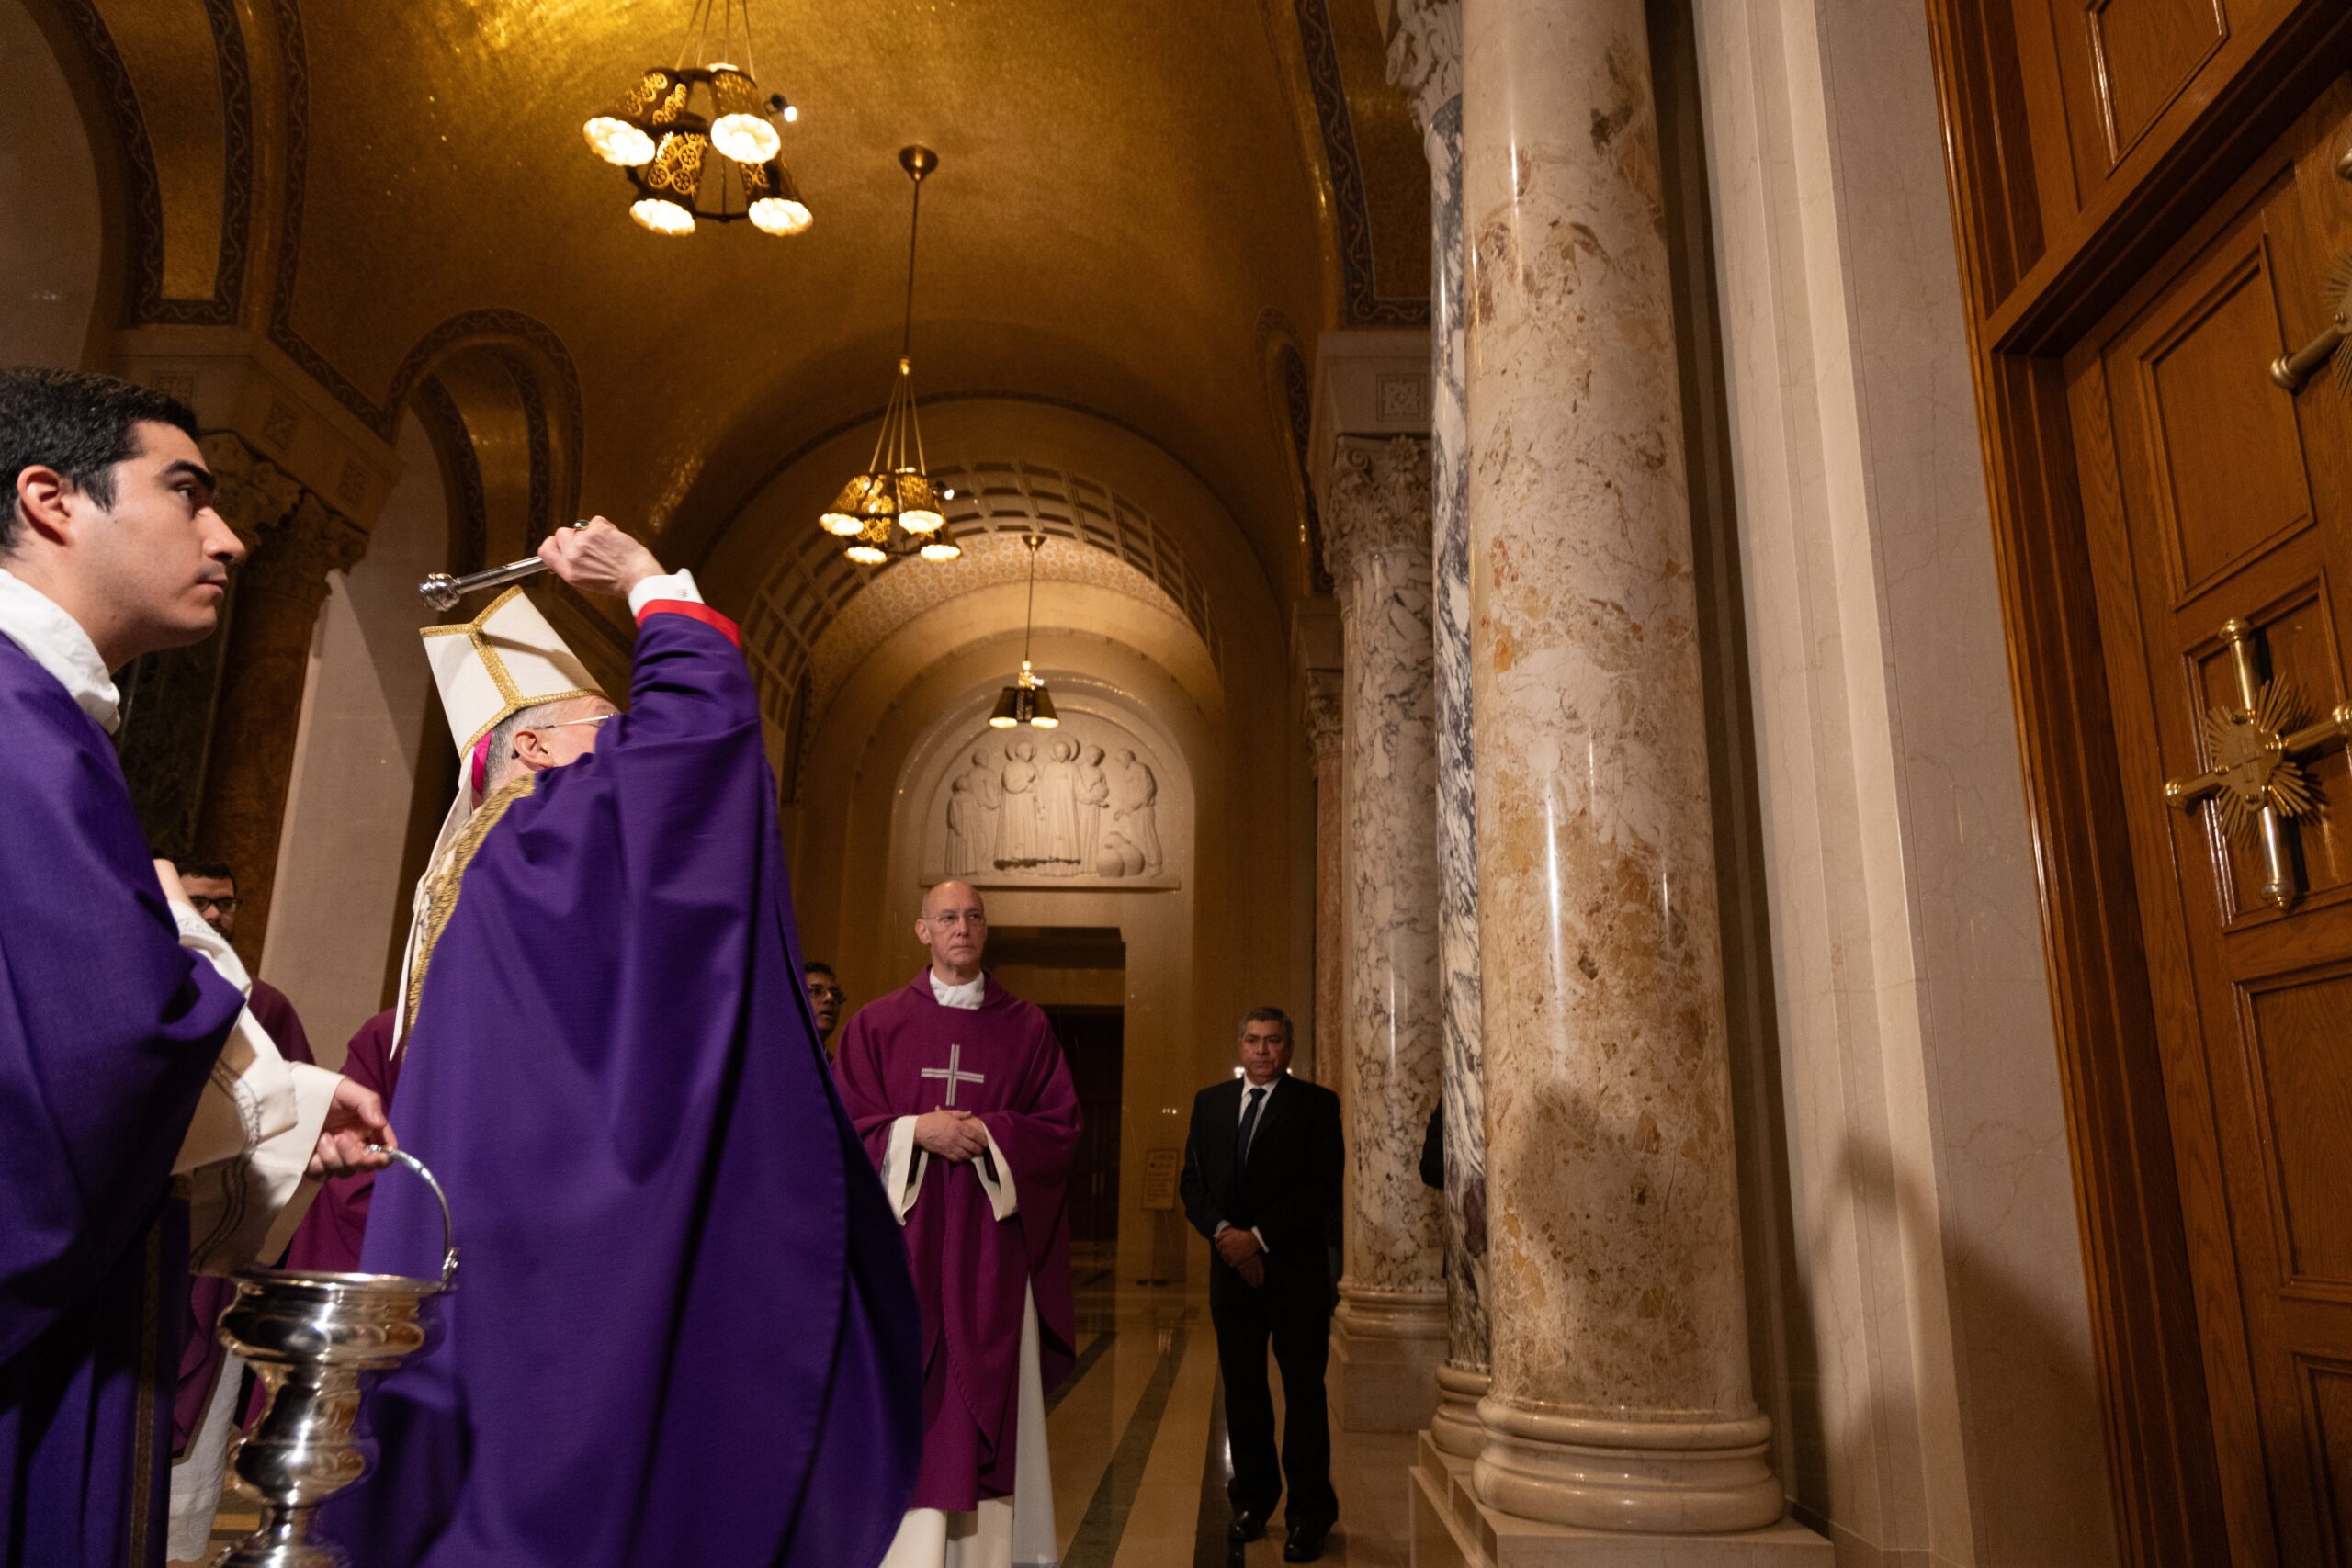 Archbishop Timothy P. Broglio, who heads the U.S. Archdiocese for the Military Services and is president of the U.S. Conference of Catholic Bishops, blesses the Holy Door after it was sealed at the Basilica of the National Shrine of the Immaculate Conception in Washington Dec. 3, 2023, the first Sunday of Advent. (OSV News photo/Alex Cranstoun, courtesy Basilica of the National Shrine of the Immaculate Conception)